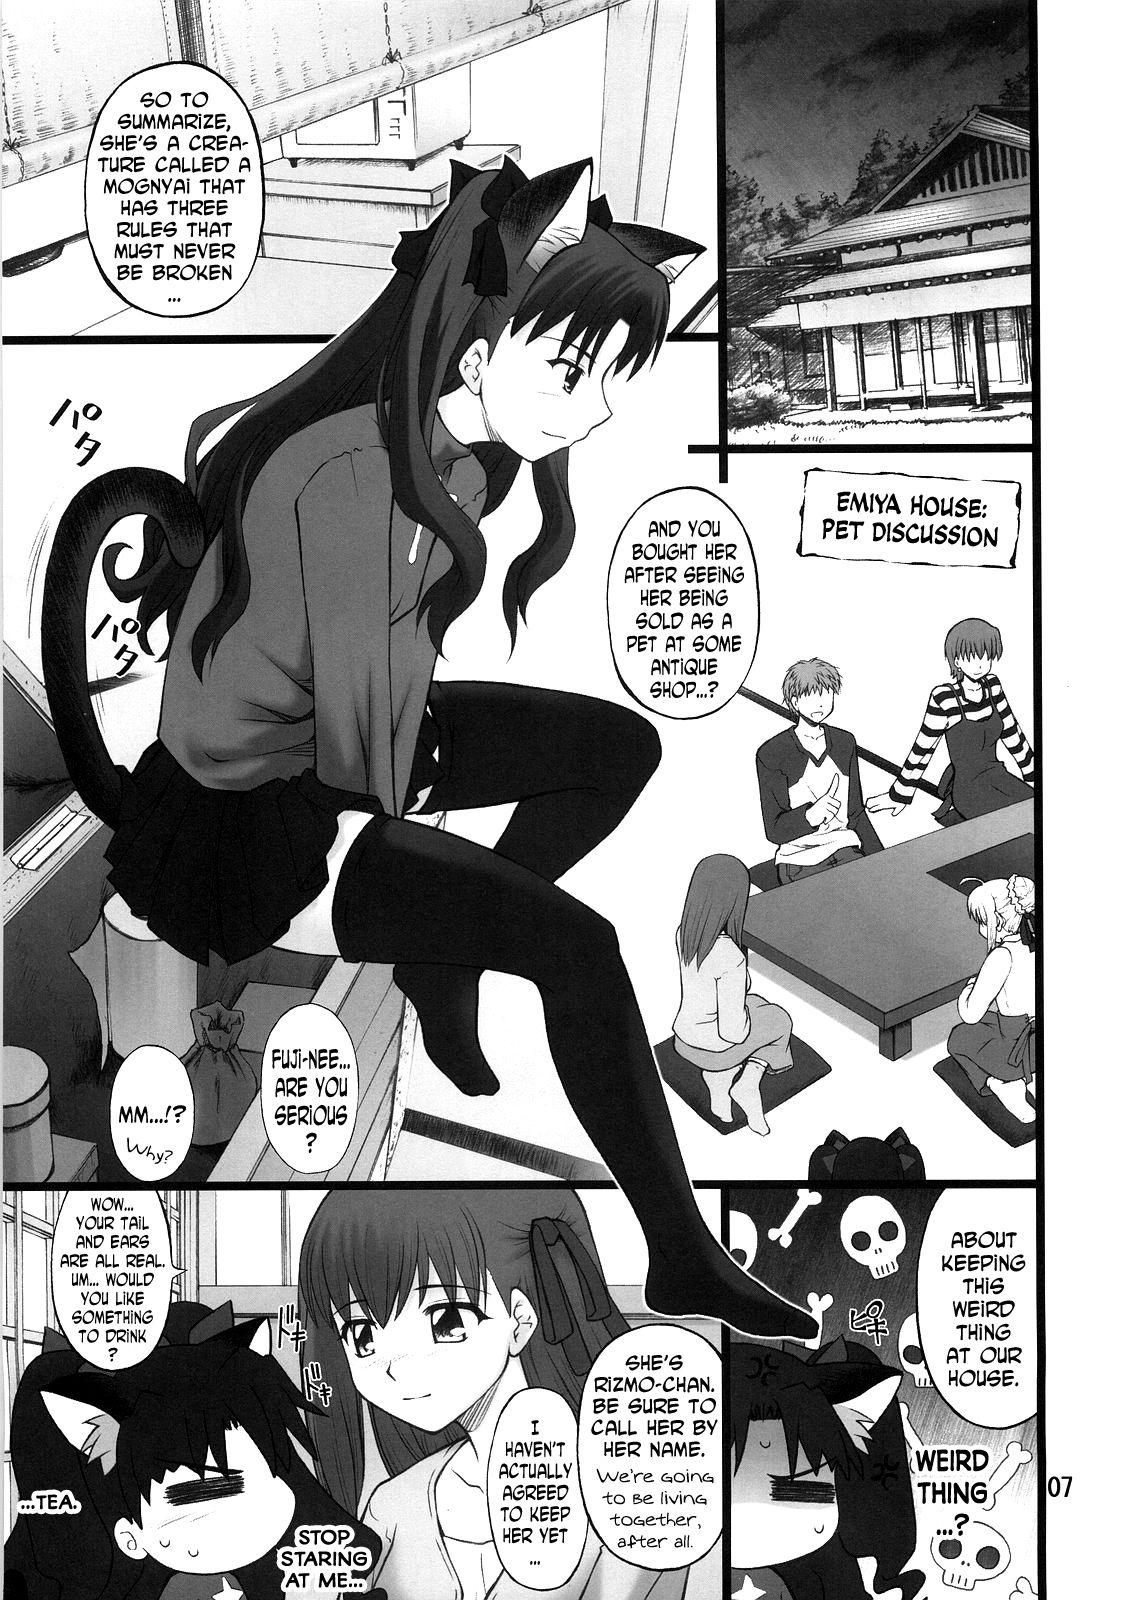 Suckingcock Grem-Rin 1 - Fate stay night Teen Hardcore - Page 6